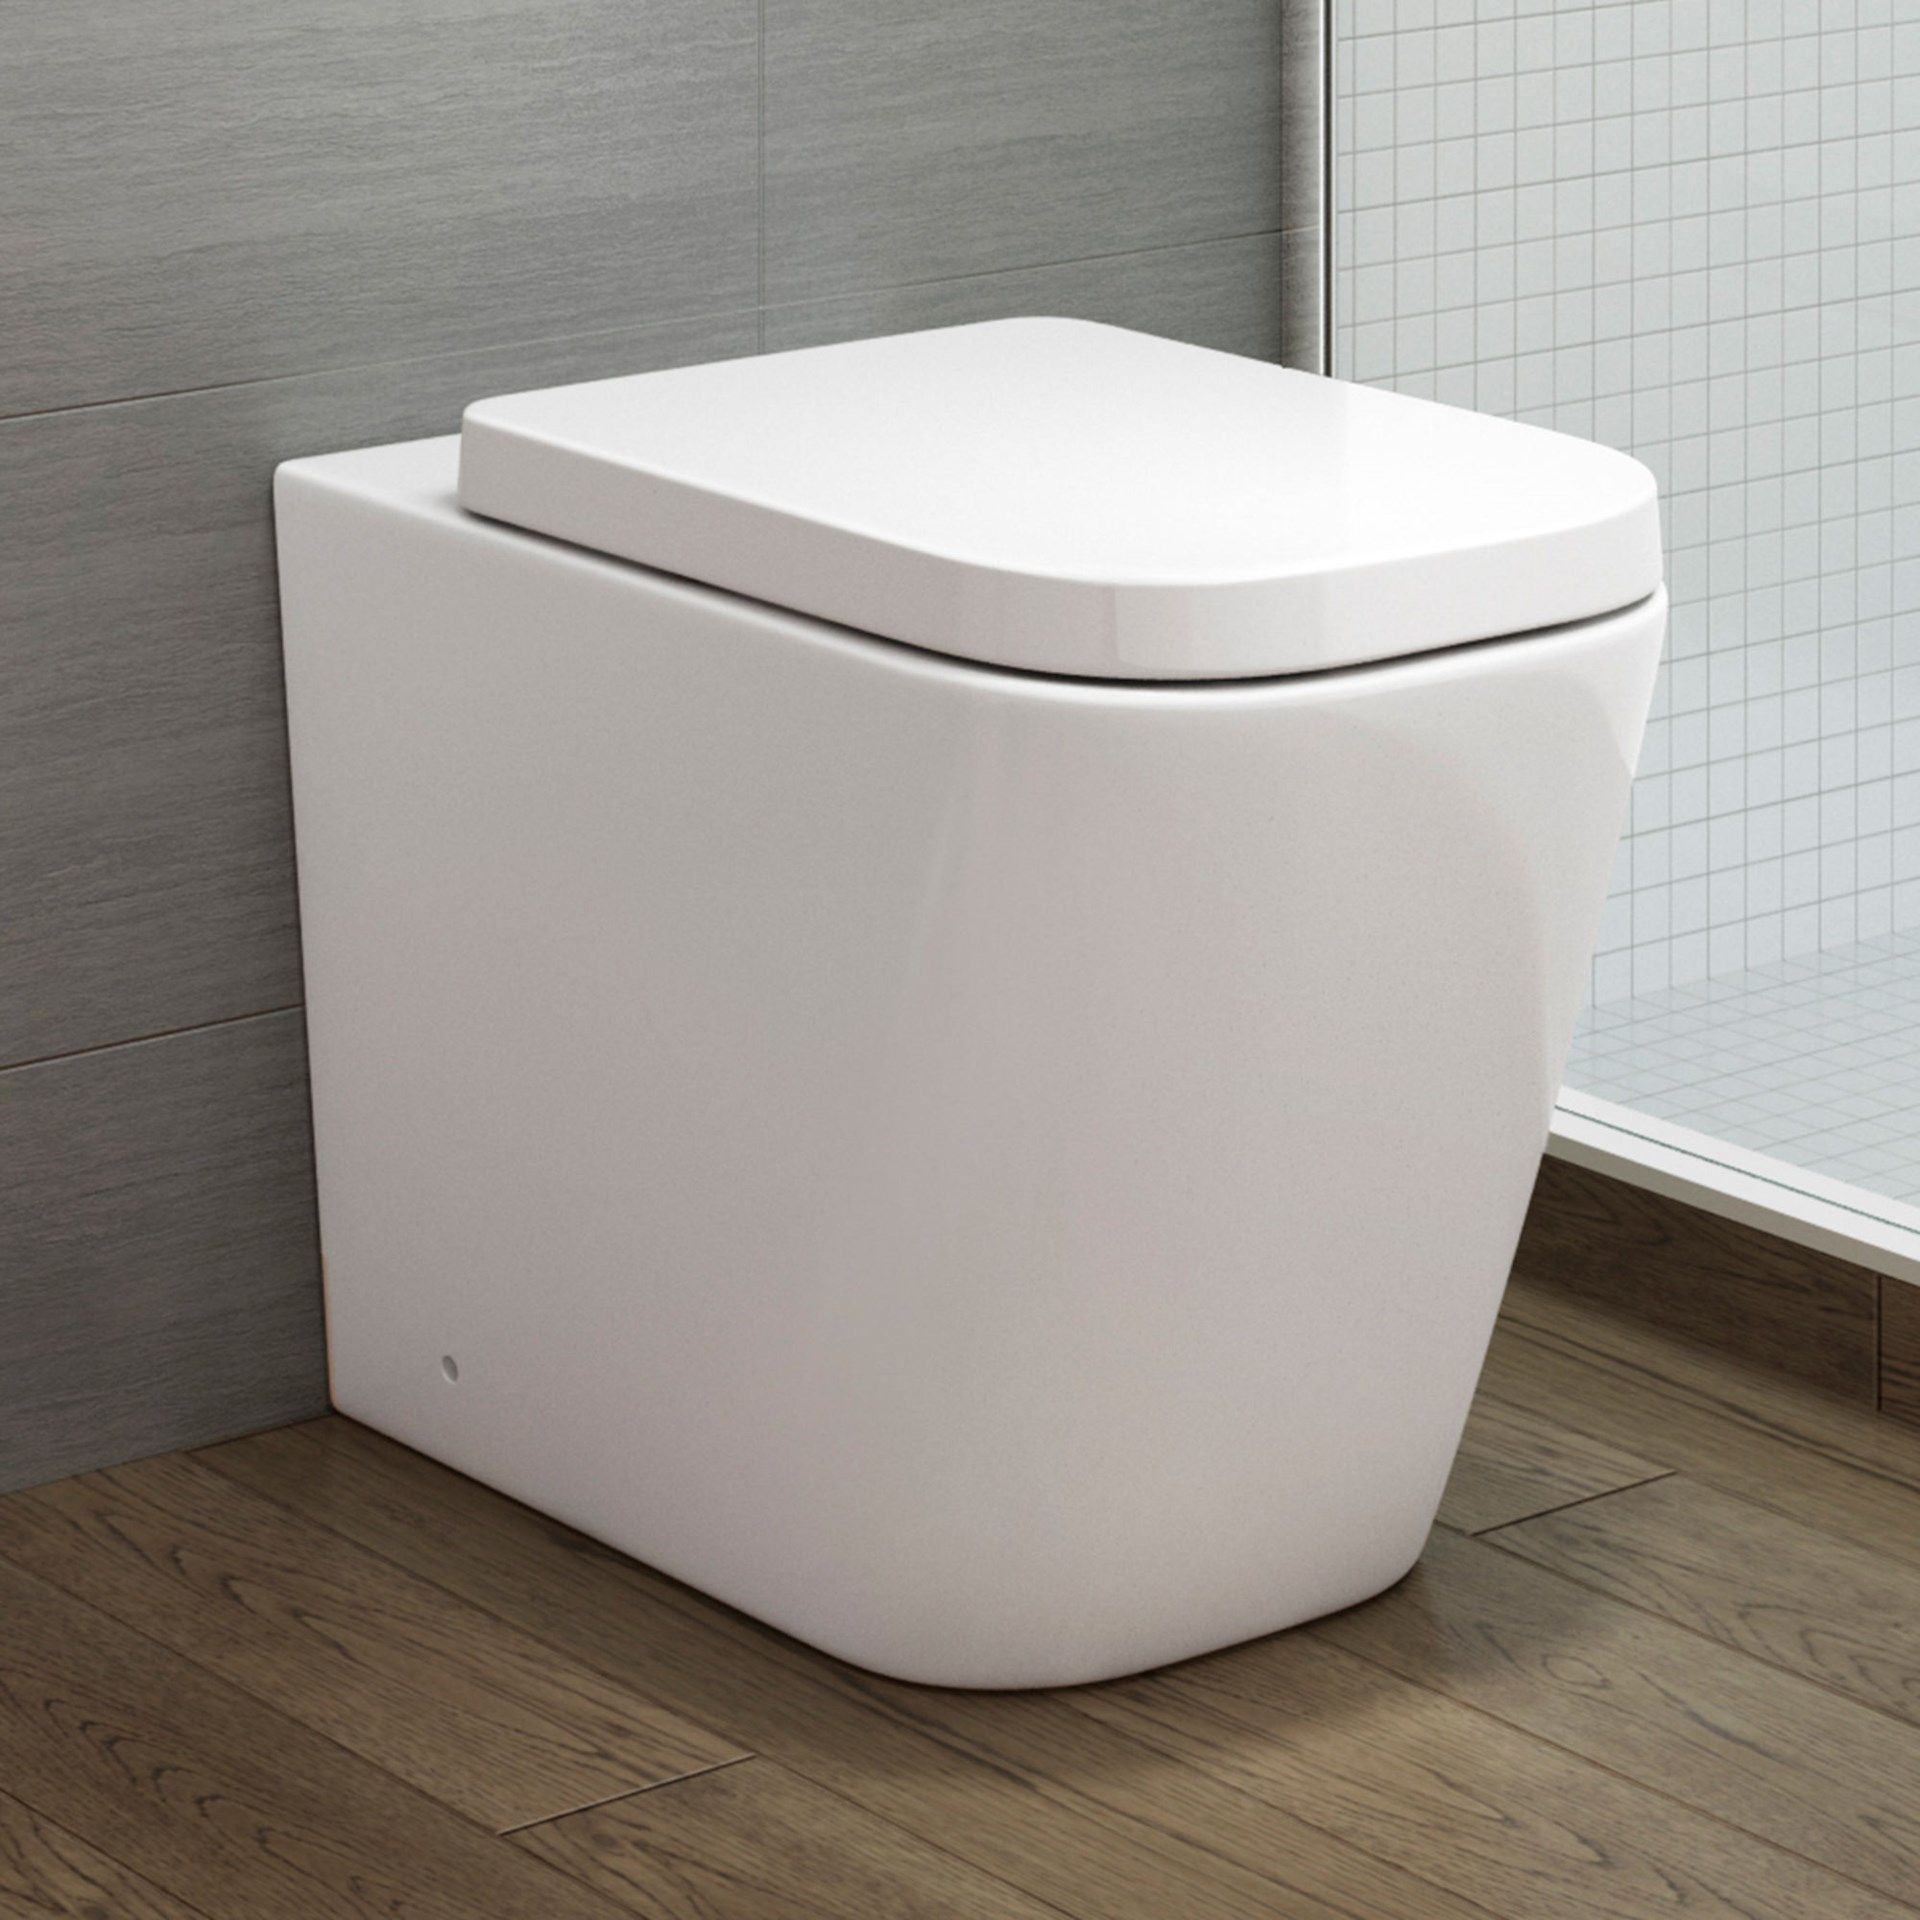 Florence Rimless Back to Wall Toilet inc Luxury Soft Close Seat Rimless design makes it easy to... - Image 2 of 3